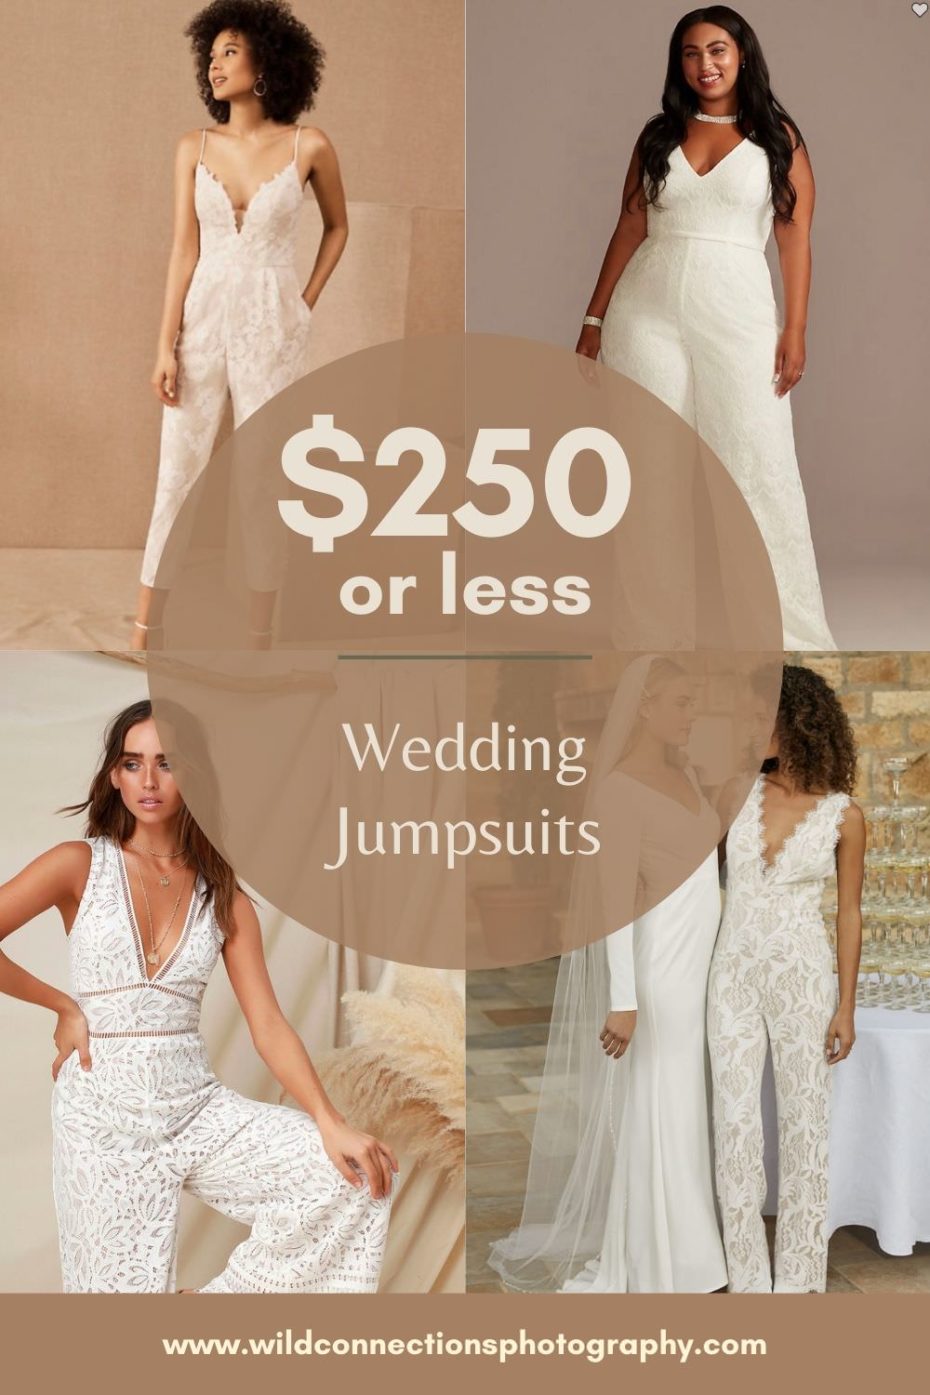 Where to buy a wedding jumpsuit for $250 of less